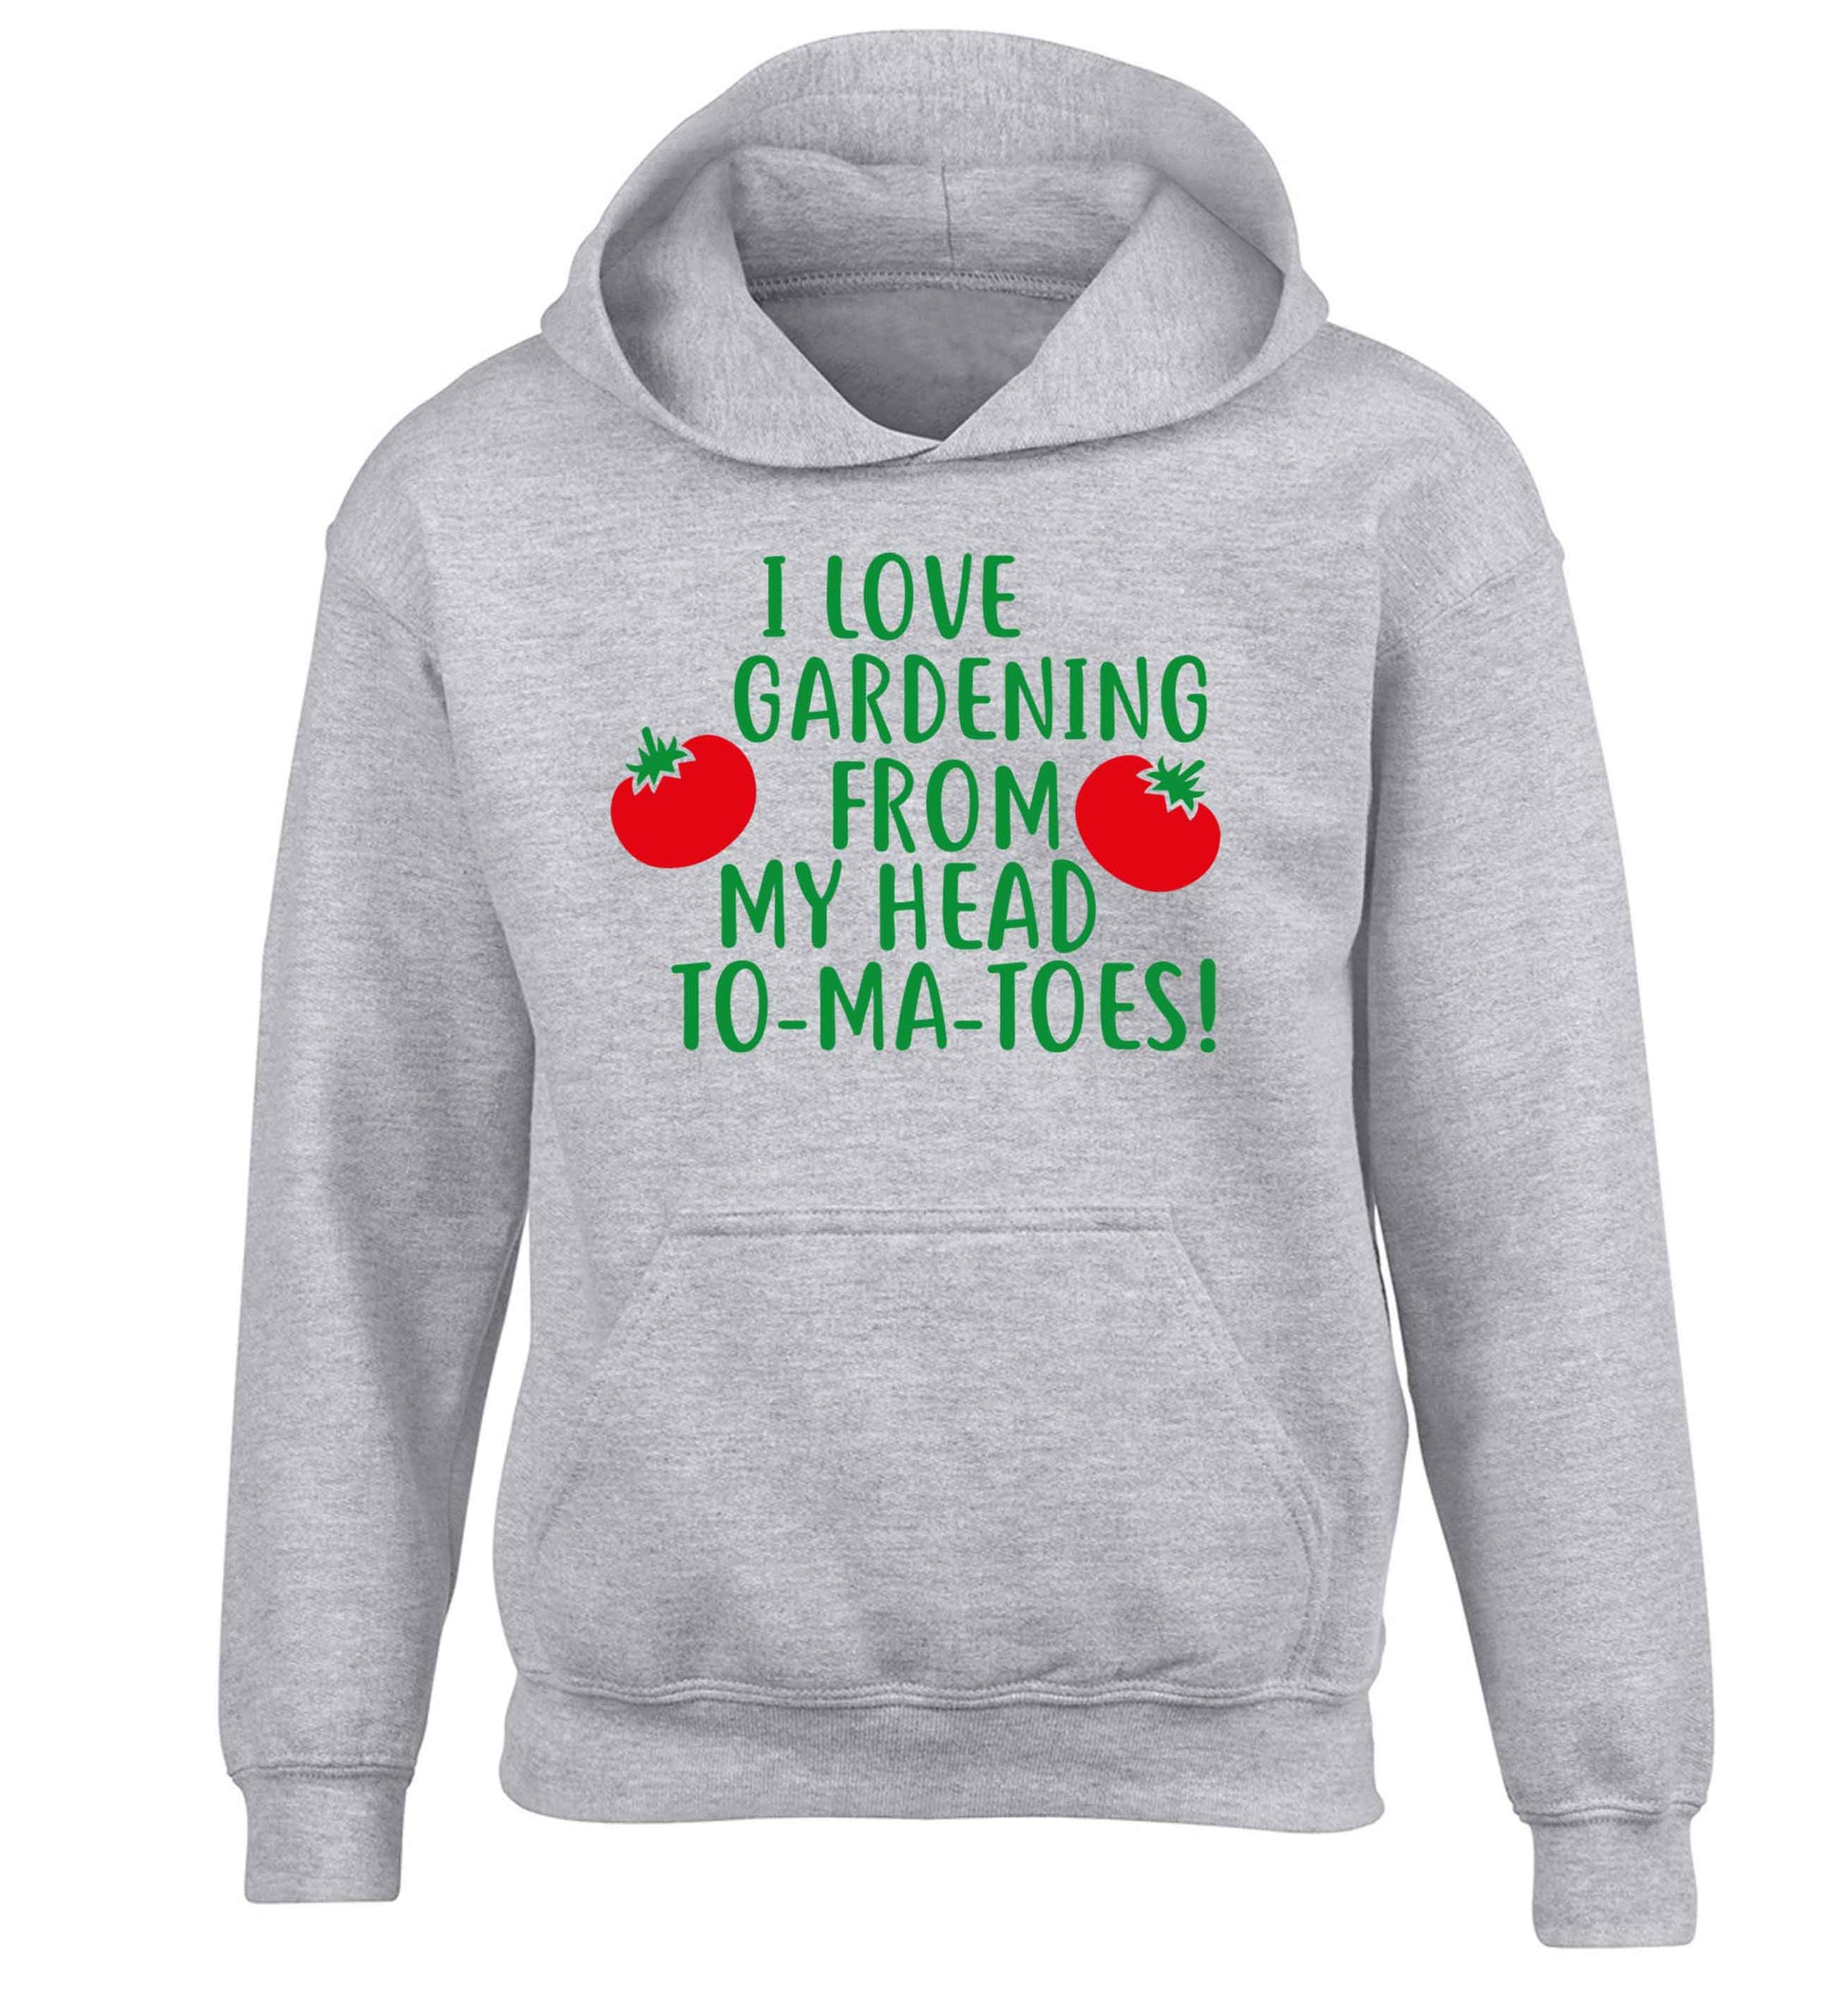 I love gardening from my head to-ma-toes children's grey hoodie 12-13 Years